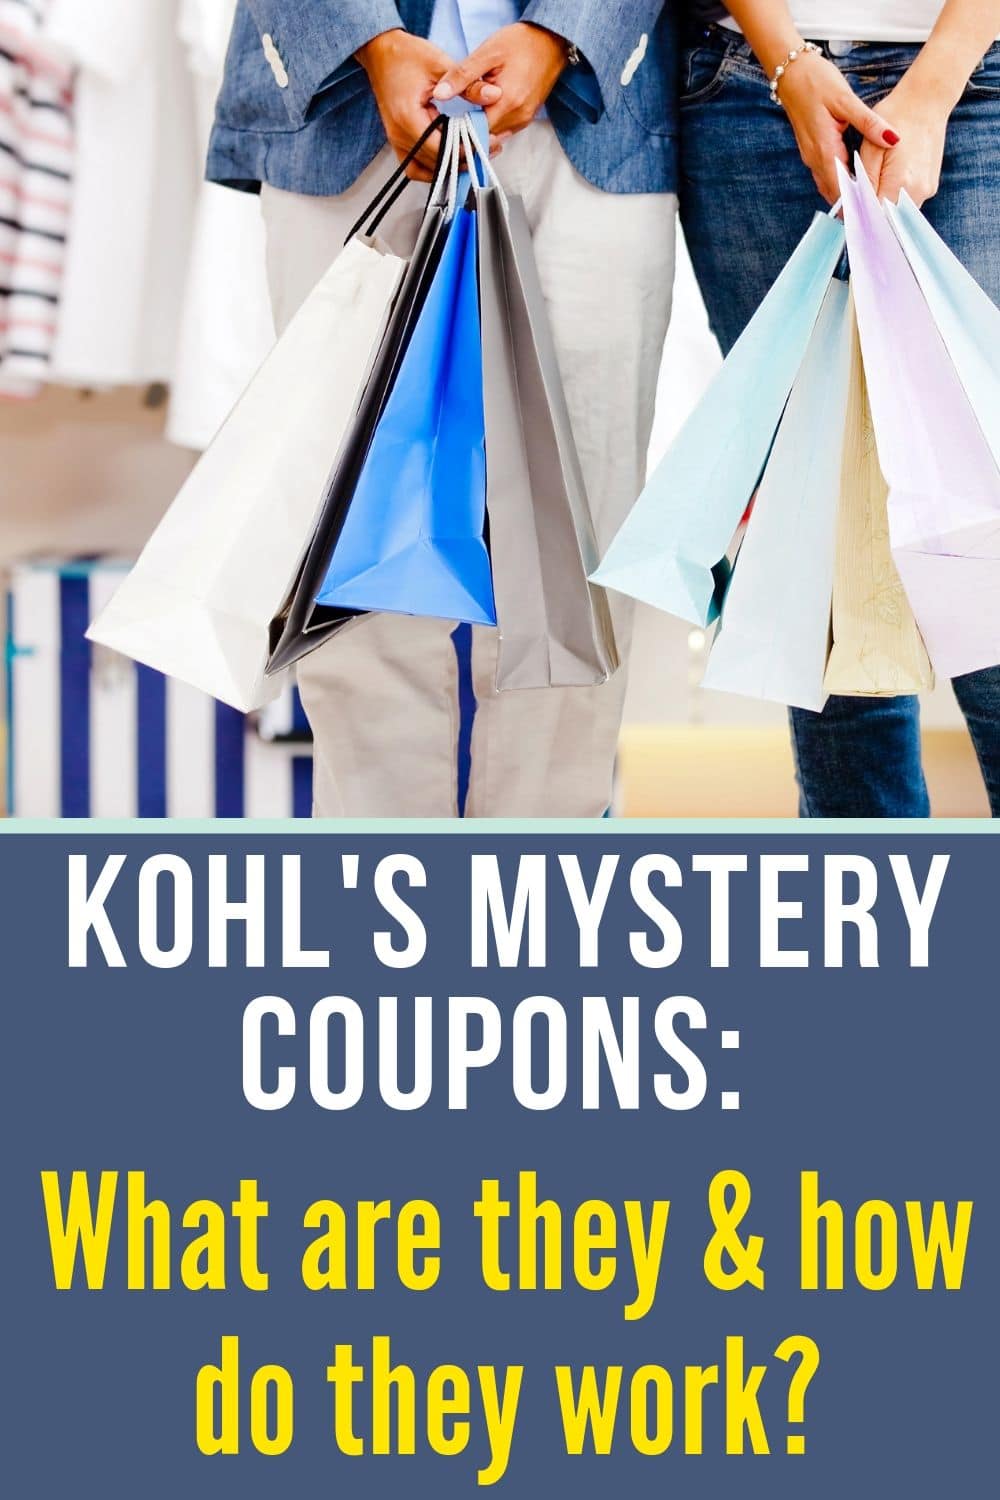 Shopping bags for Kohl's mystery coupon codes and how they work